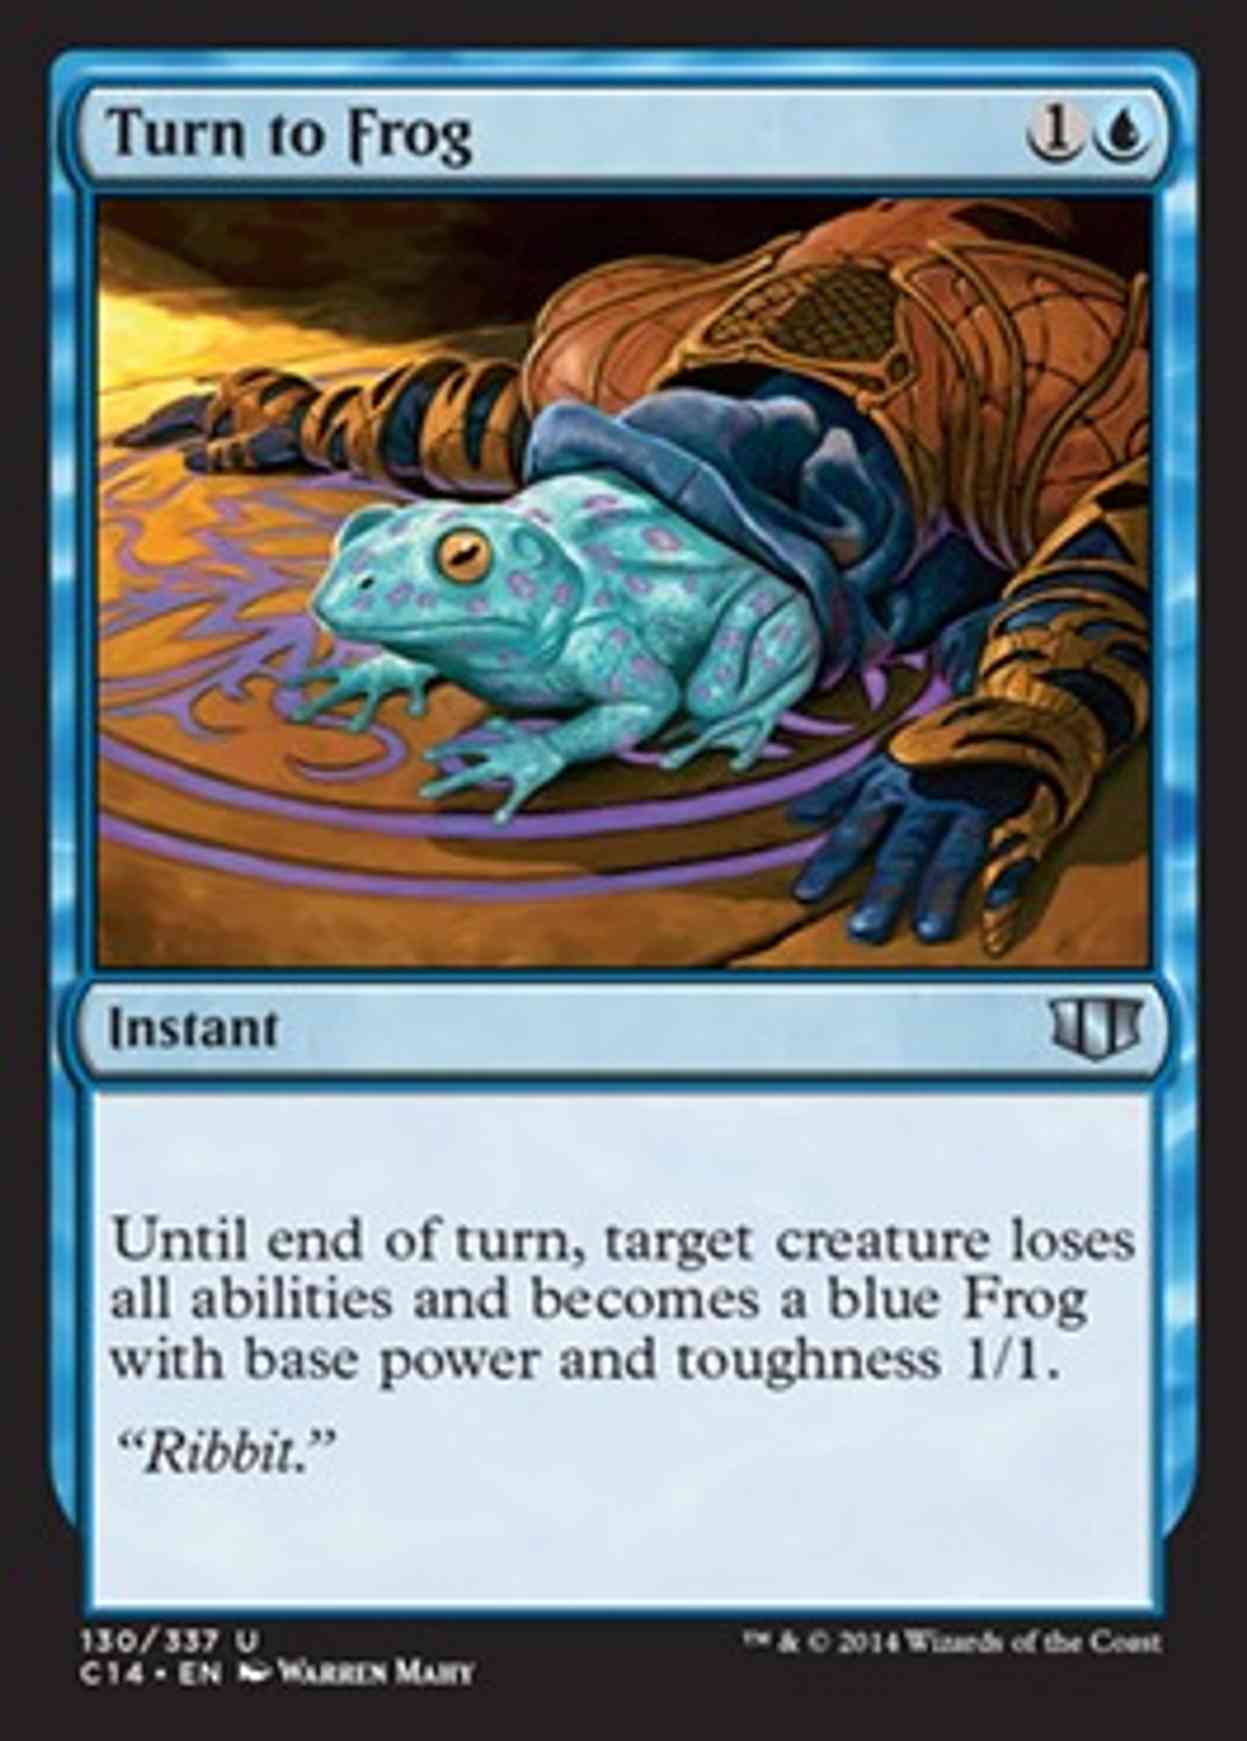 Turn to Frog magic card front